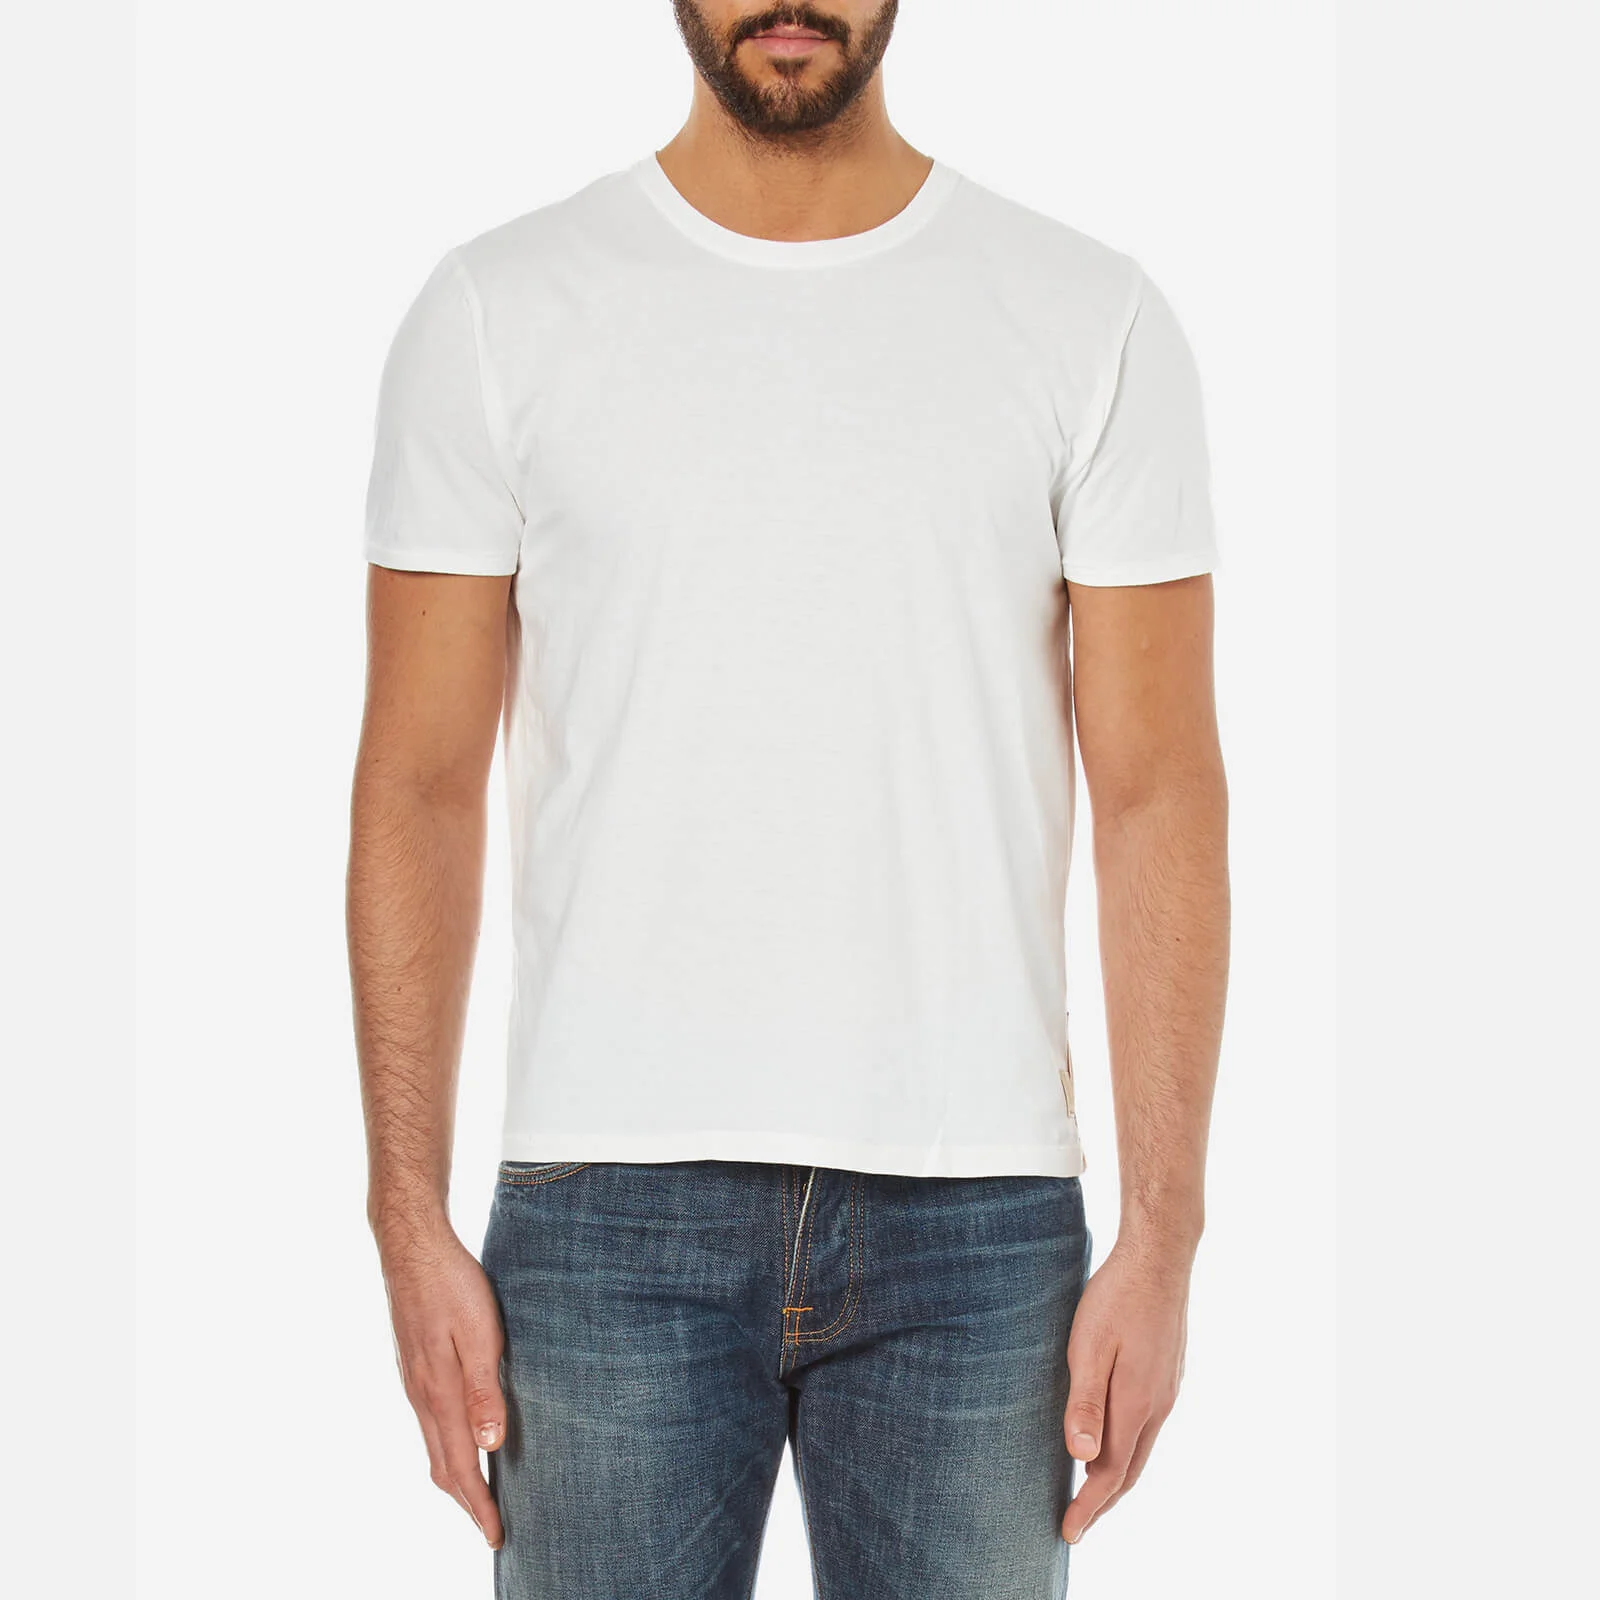 Nudie Jeans Men's O Neck T-Shirt - Off White Image 1